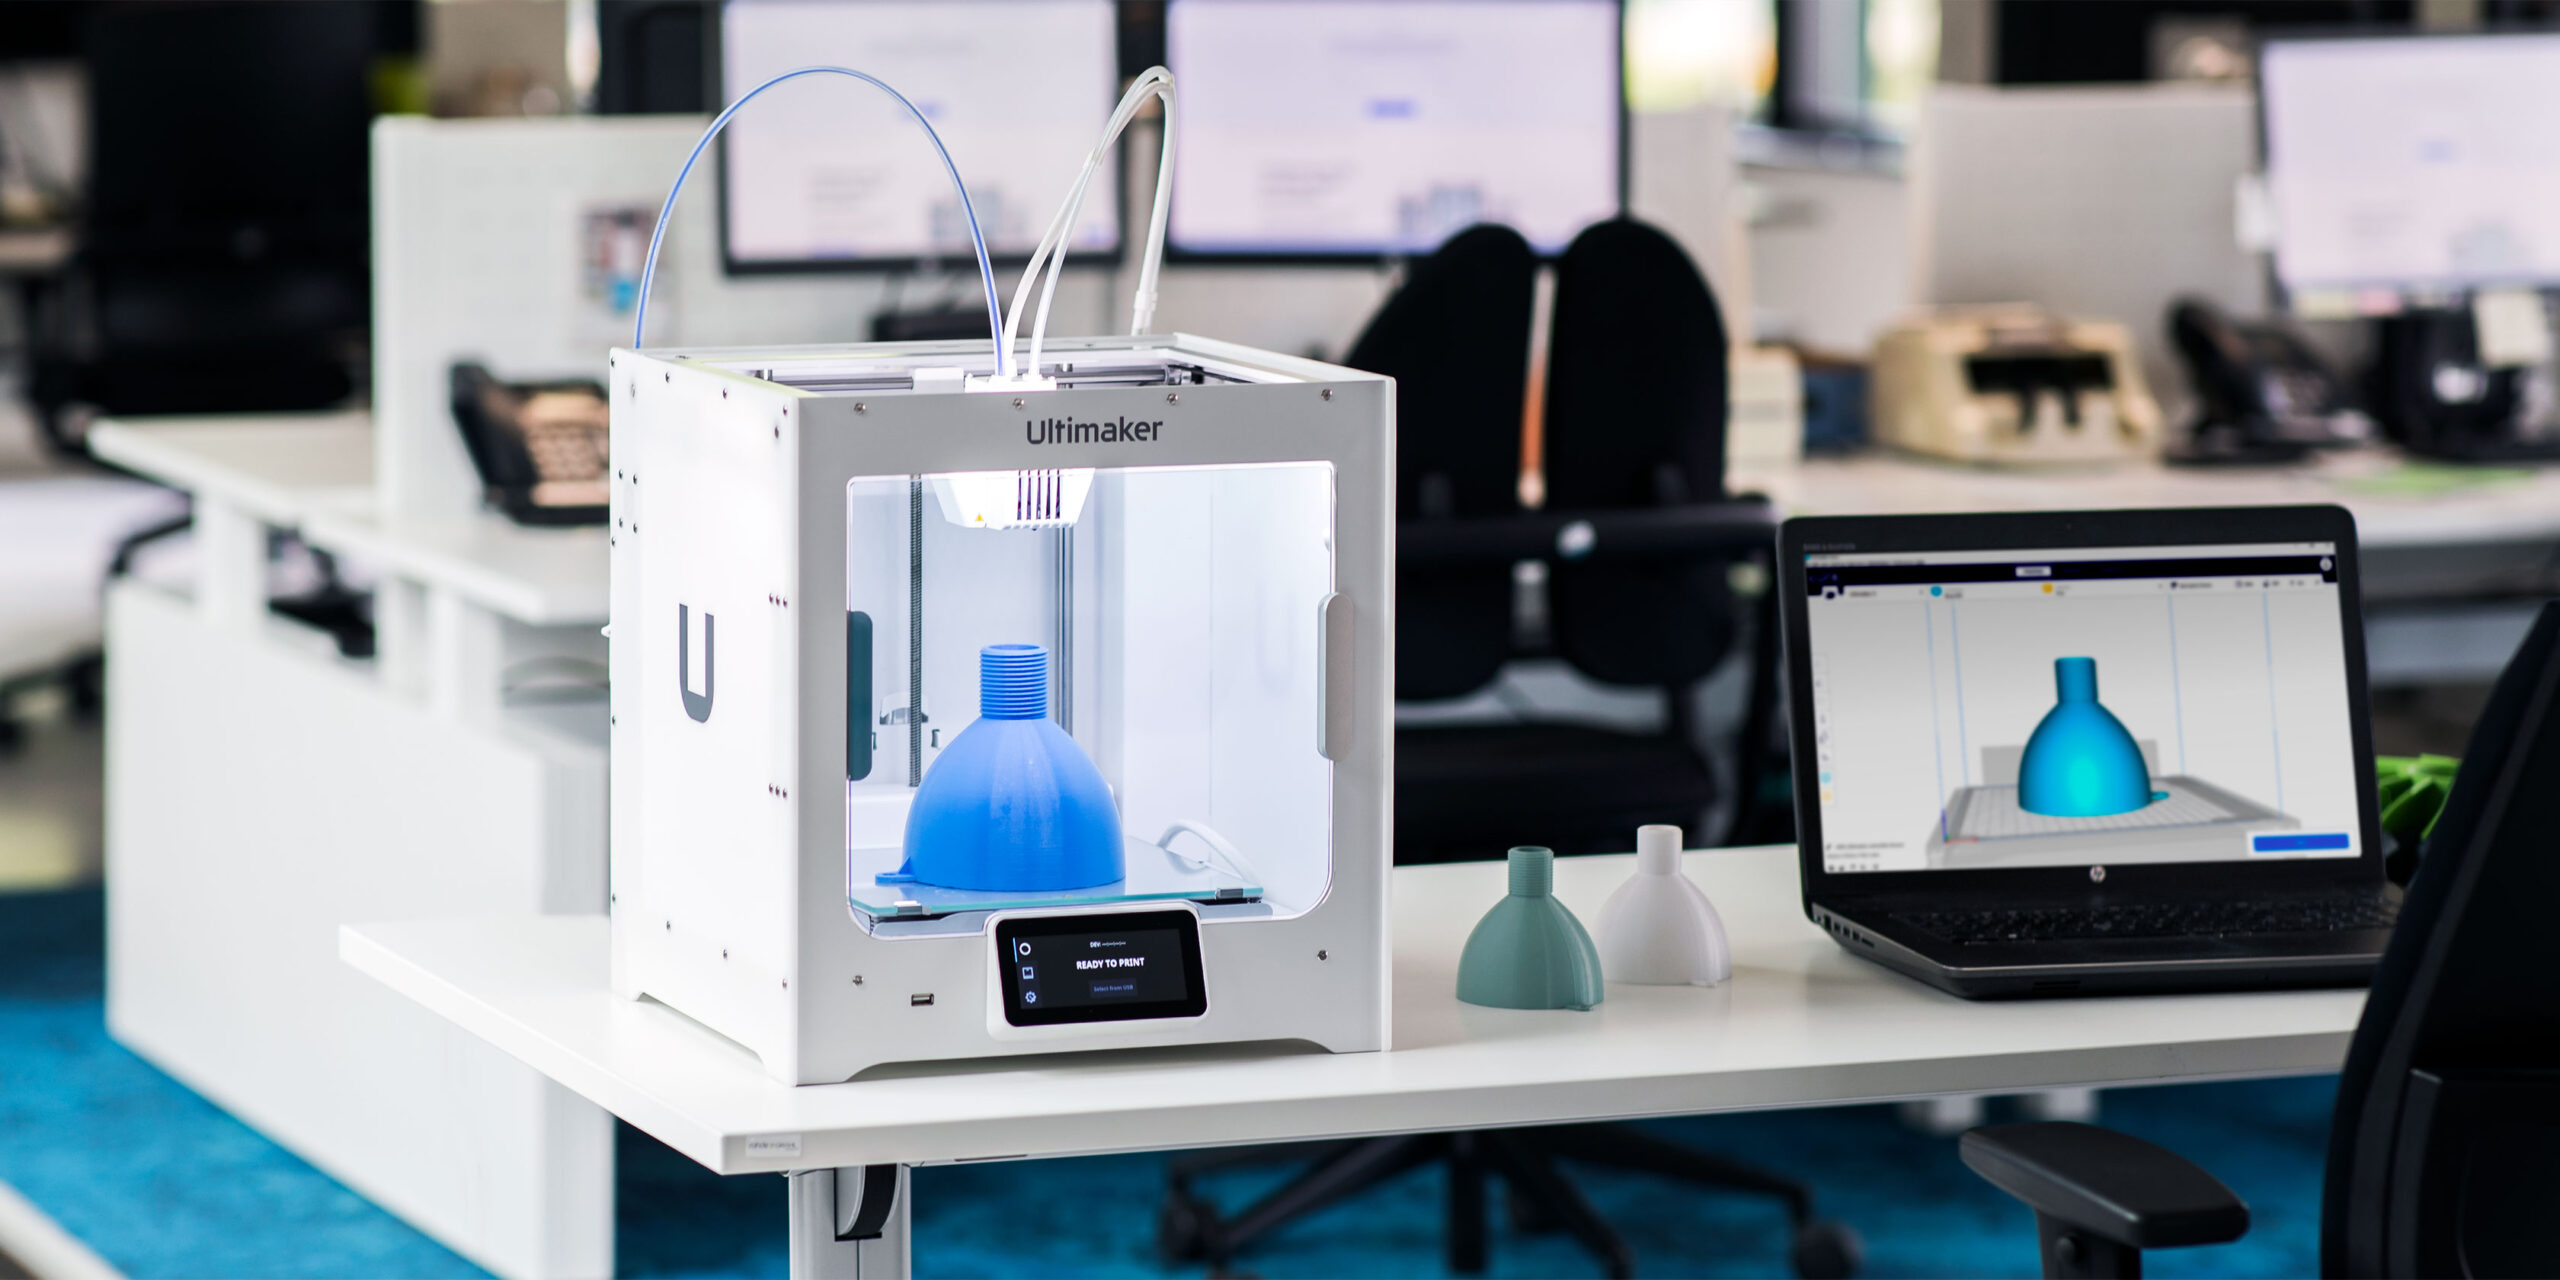 Ultimaker S3 offers a powerful 3D printing experience in an impressively small footprint